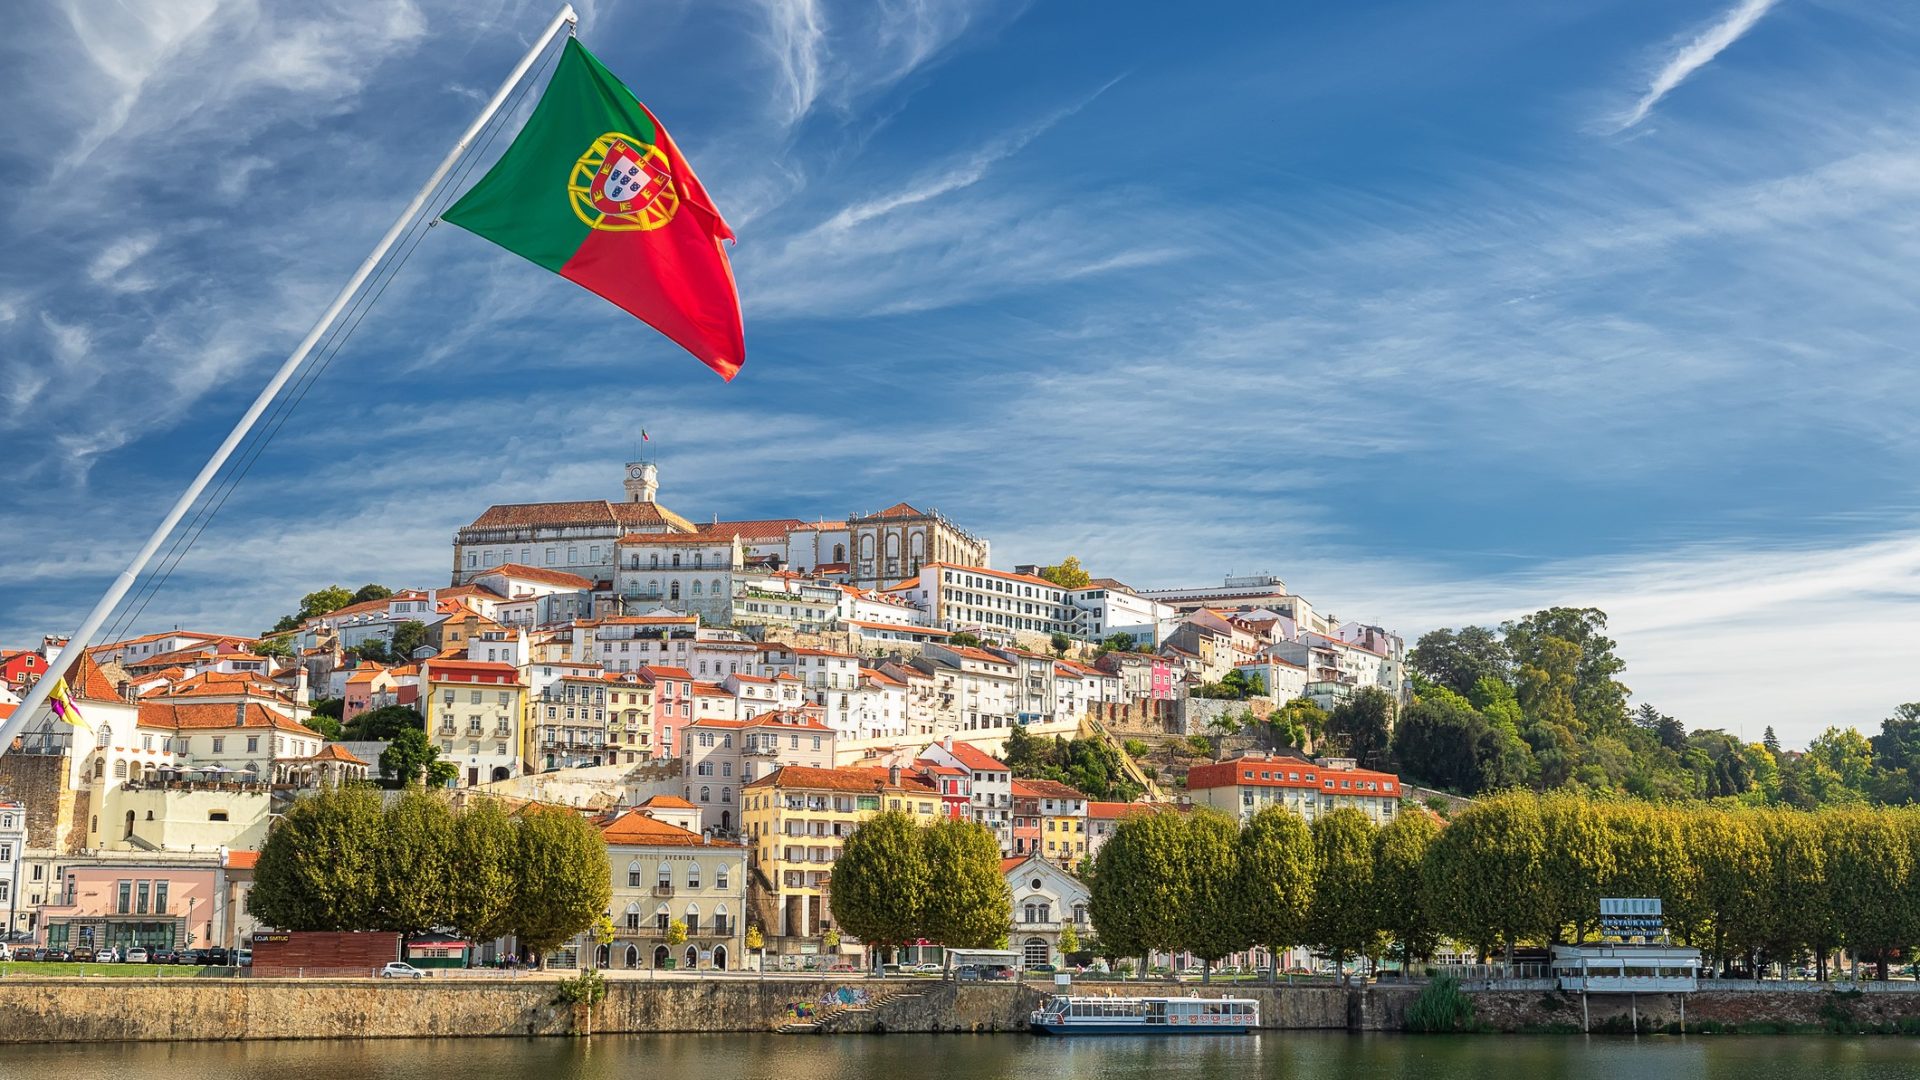 <ul> <li><strong>Average home price: </strong>$799,360</li> </ul> <p>Coimbra is an ancient university town with a long and complex history, architectural gems and an energetic student vibe. If culture is your thing, a visit to the iconic <em>Biblioteca Joanina</em> at the University of Coimbra should be on your list of stops. </p> <p>With a stately grandeur, whitewashed walls and a unique roofline featuring Baroque details, this library vividly portrays Coimbra's past while maintaining the enduring pursuit of knowledge. It's at once imposing, lively and vibrant, thanks to the many university students who study in the city.</p> <p><strong>Trending Now: <a href="https://www.gobankingrates.com/investing/real-estate/housing-market-home-prices-plummeting-in-10-formerly-overpriced-housing-markets/?utm_term=related_link_6&utm_campaign=1269648&utm_source=msn.com&utm_content=8&utm_medium=rss" rel="">Housing Market 2024: Home Prices Are Plummeting in 10 Formerly Overpriced Housing Markets</a></strong></p>